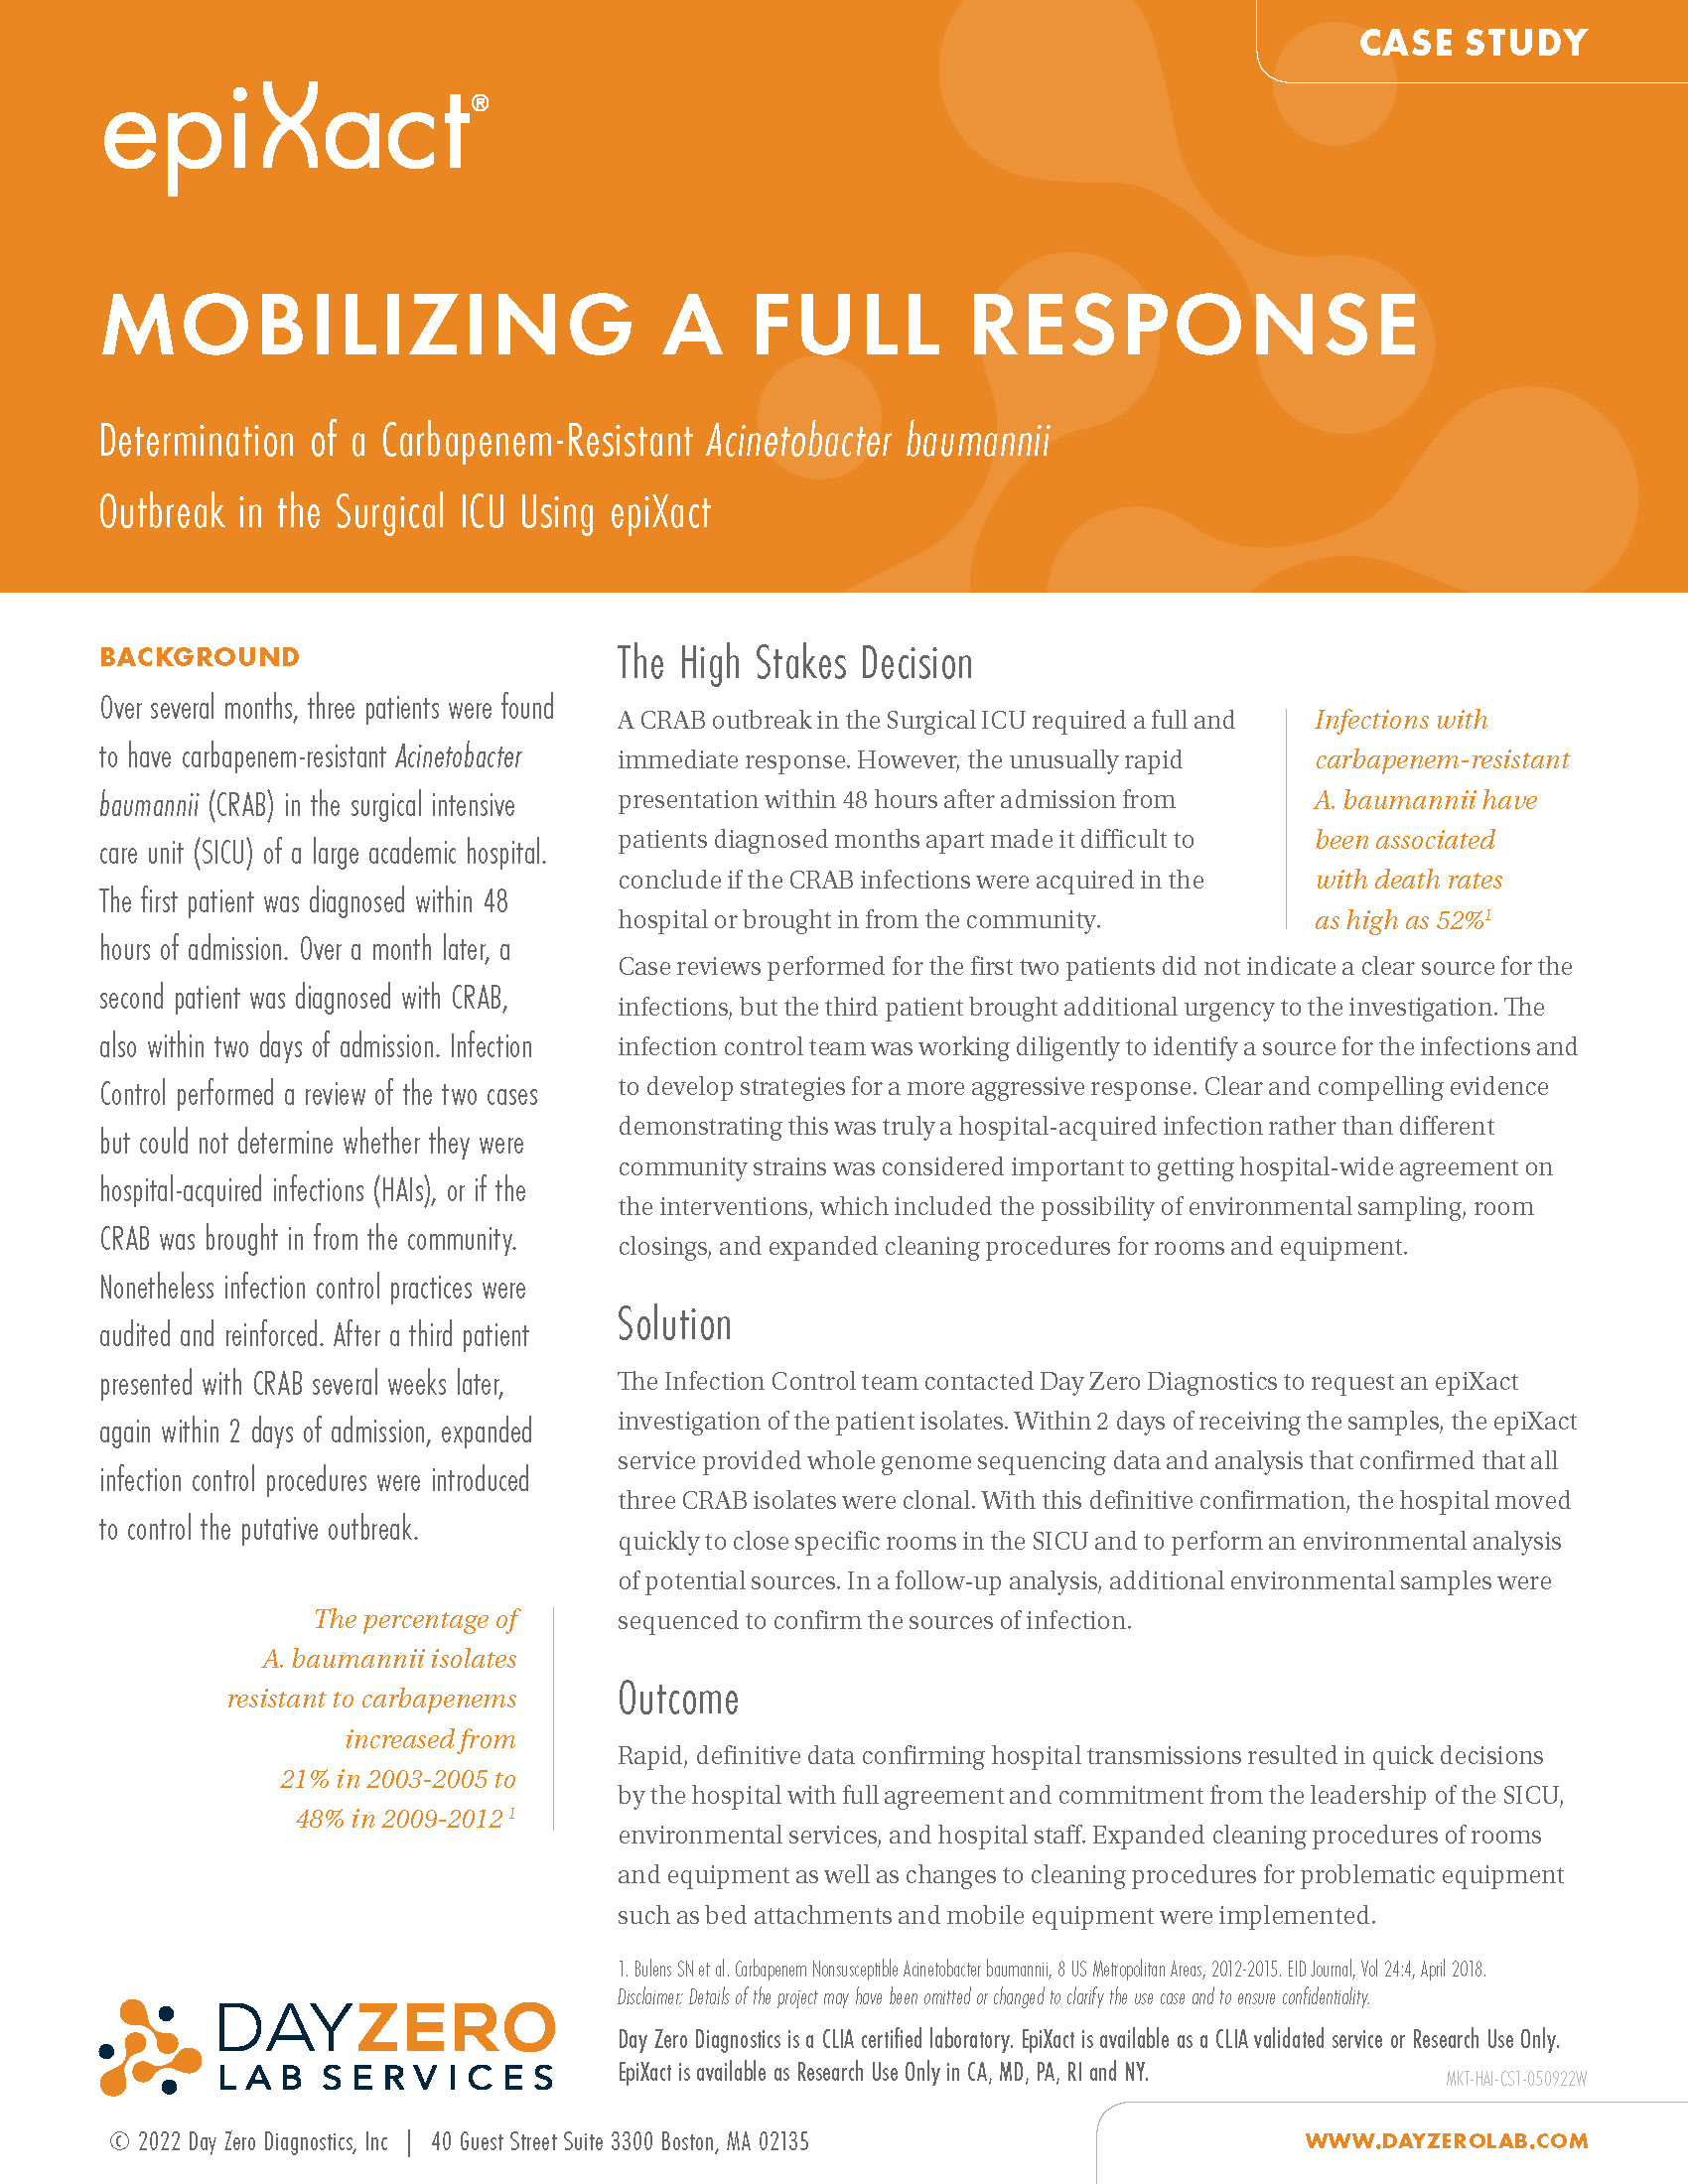 Case Study: Mobilizing A Full Response